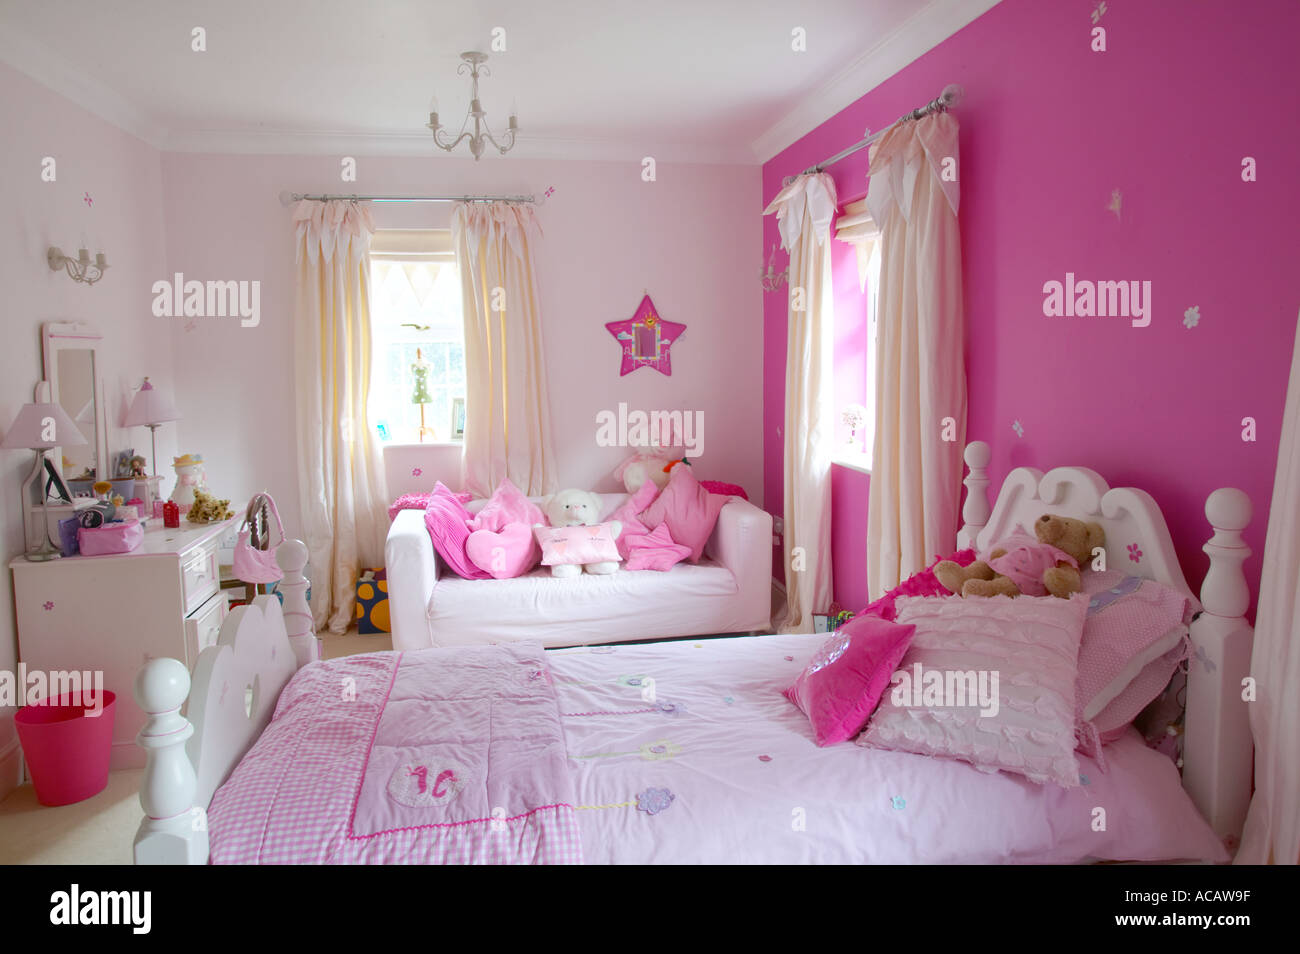 girl s bedroom of large home with en suite facilities Stock Photo